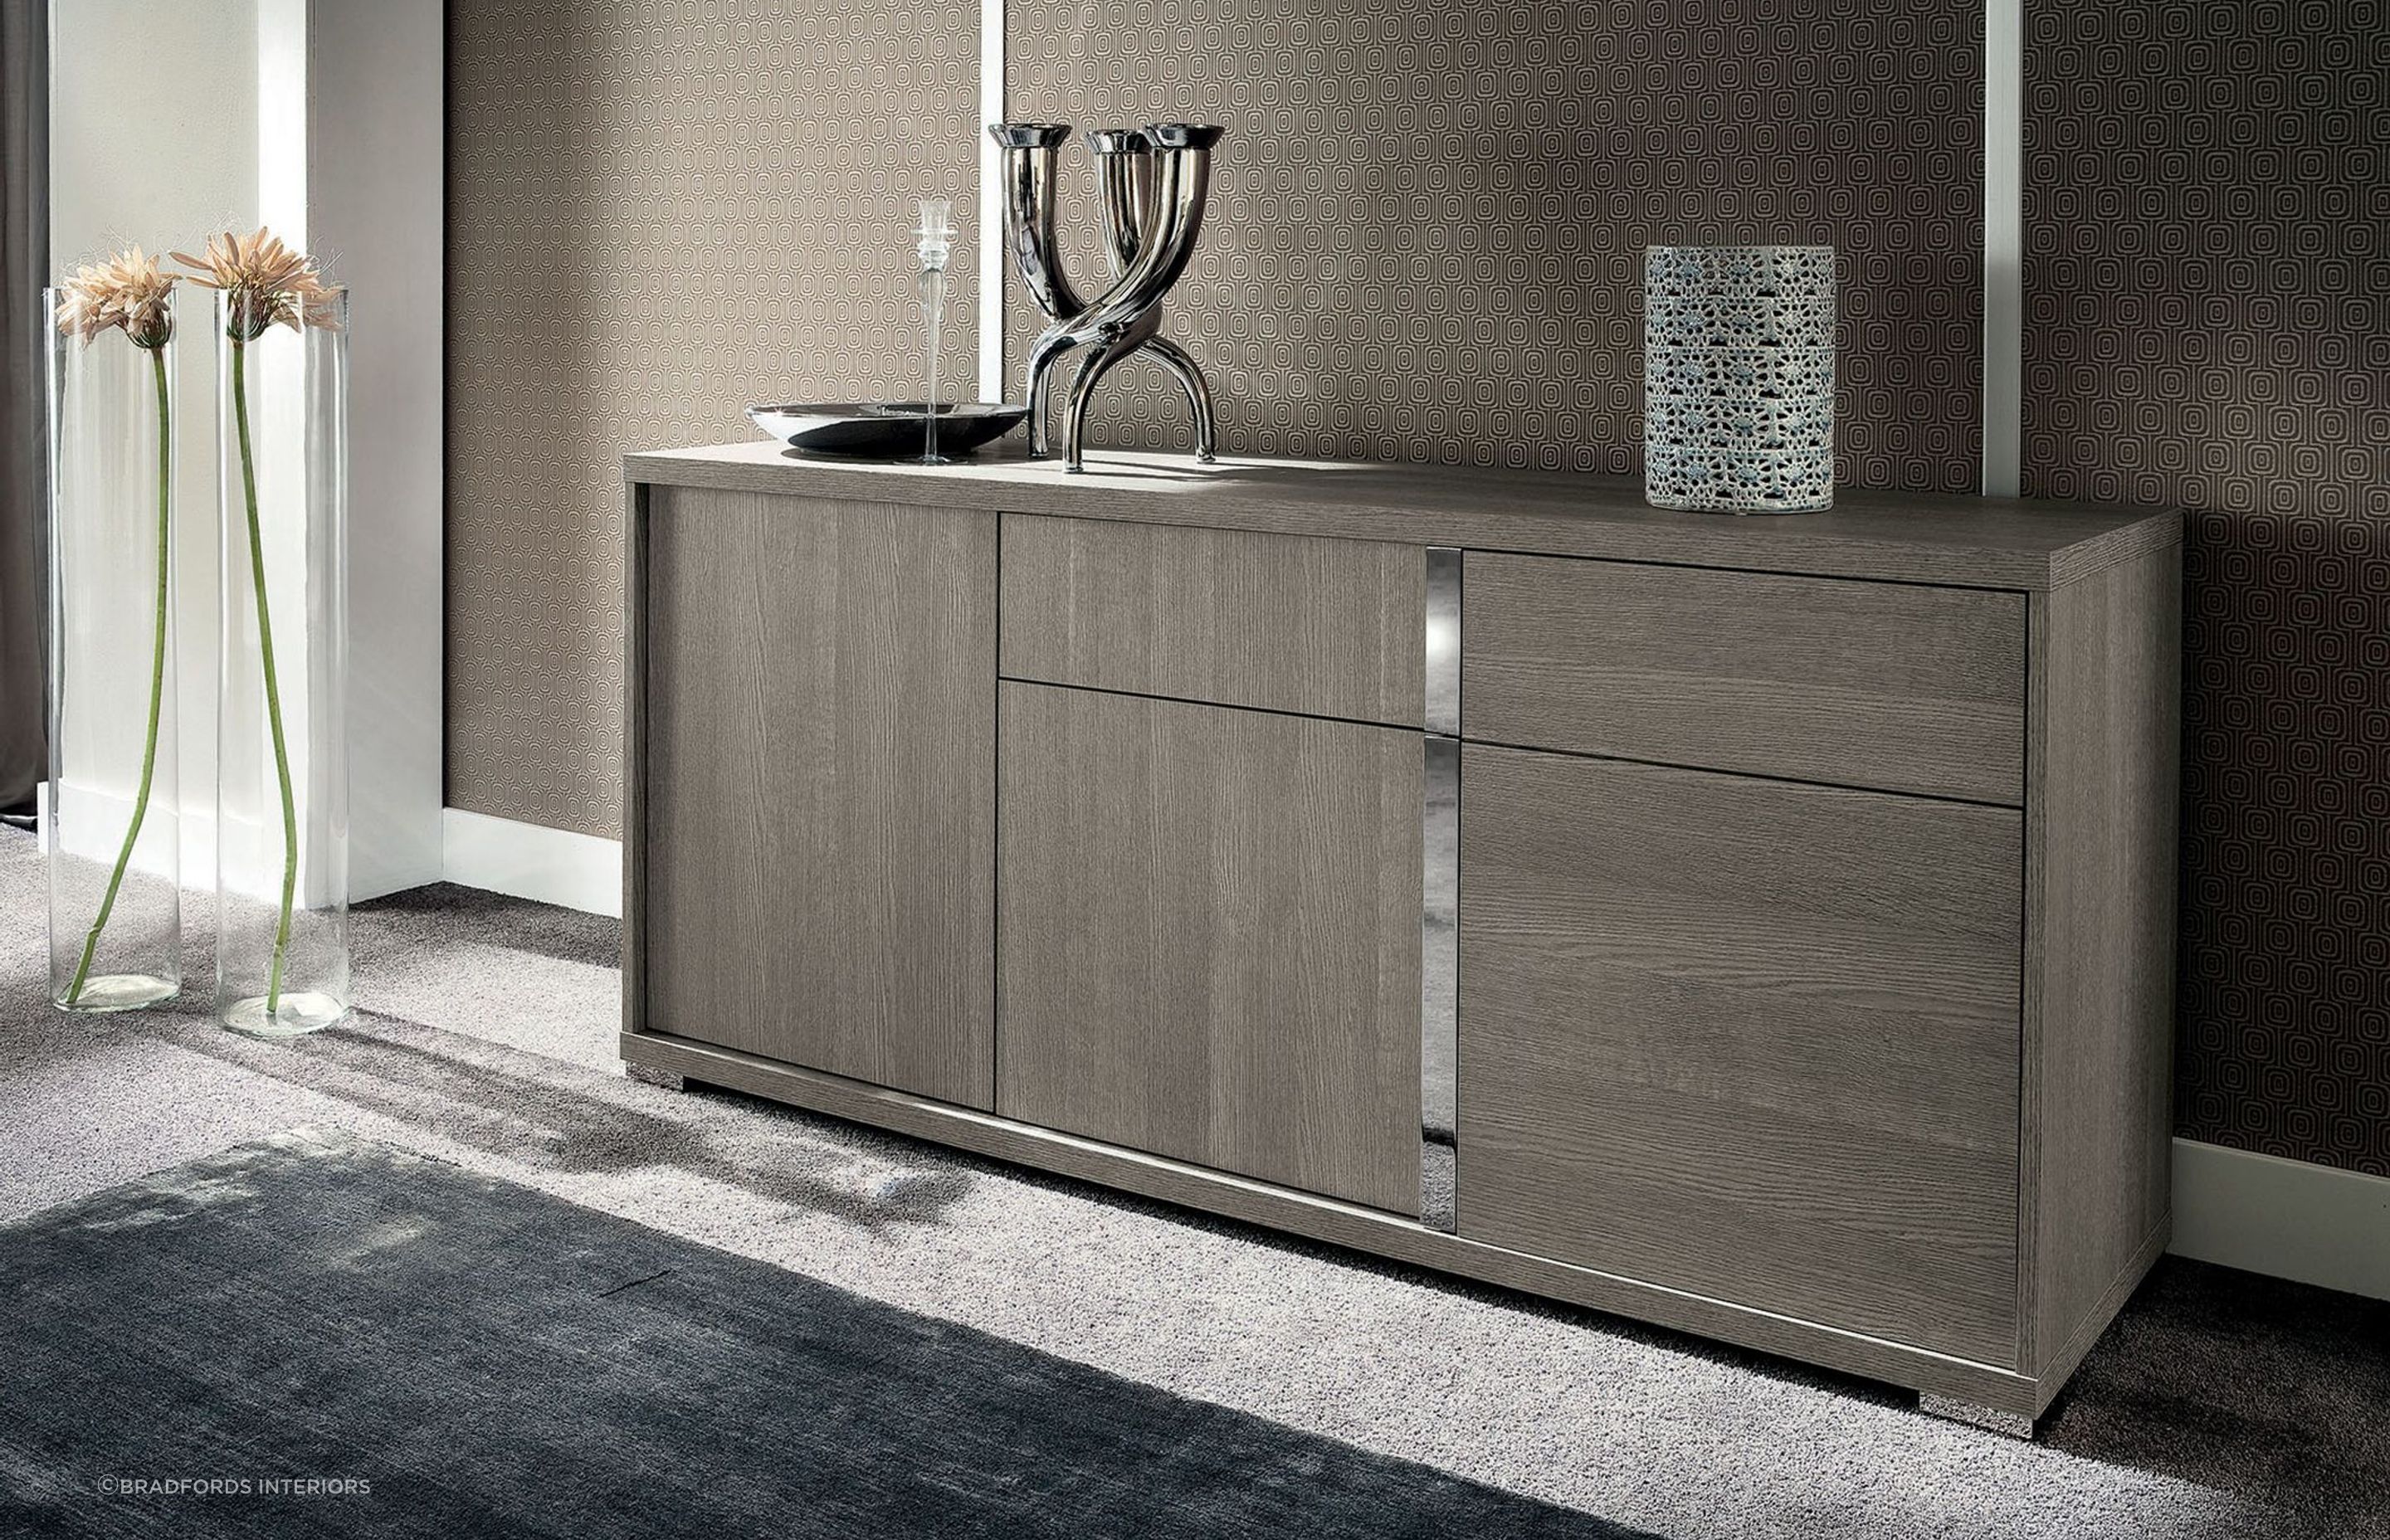 Crisp lines and chrome accents effortlessly elevate the aesthetics of the Tivoli Buffet by Alf Italia